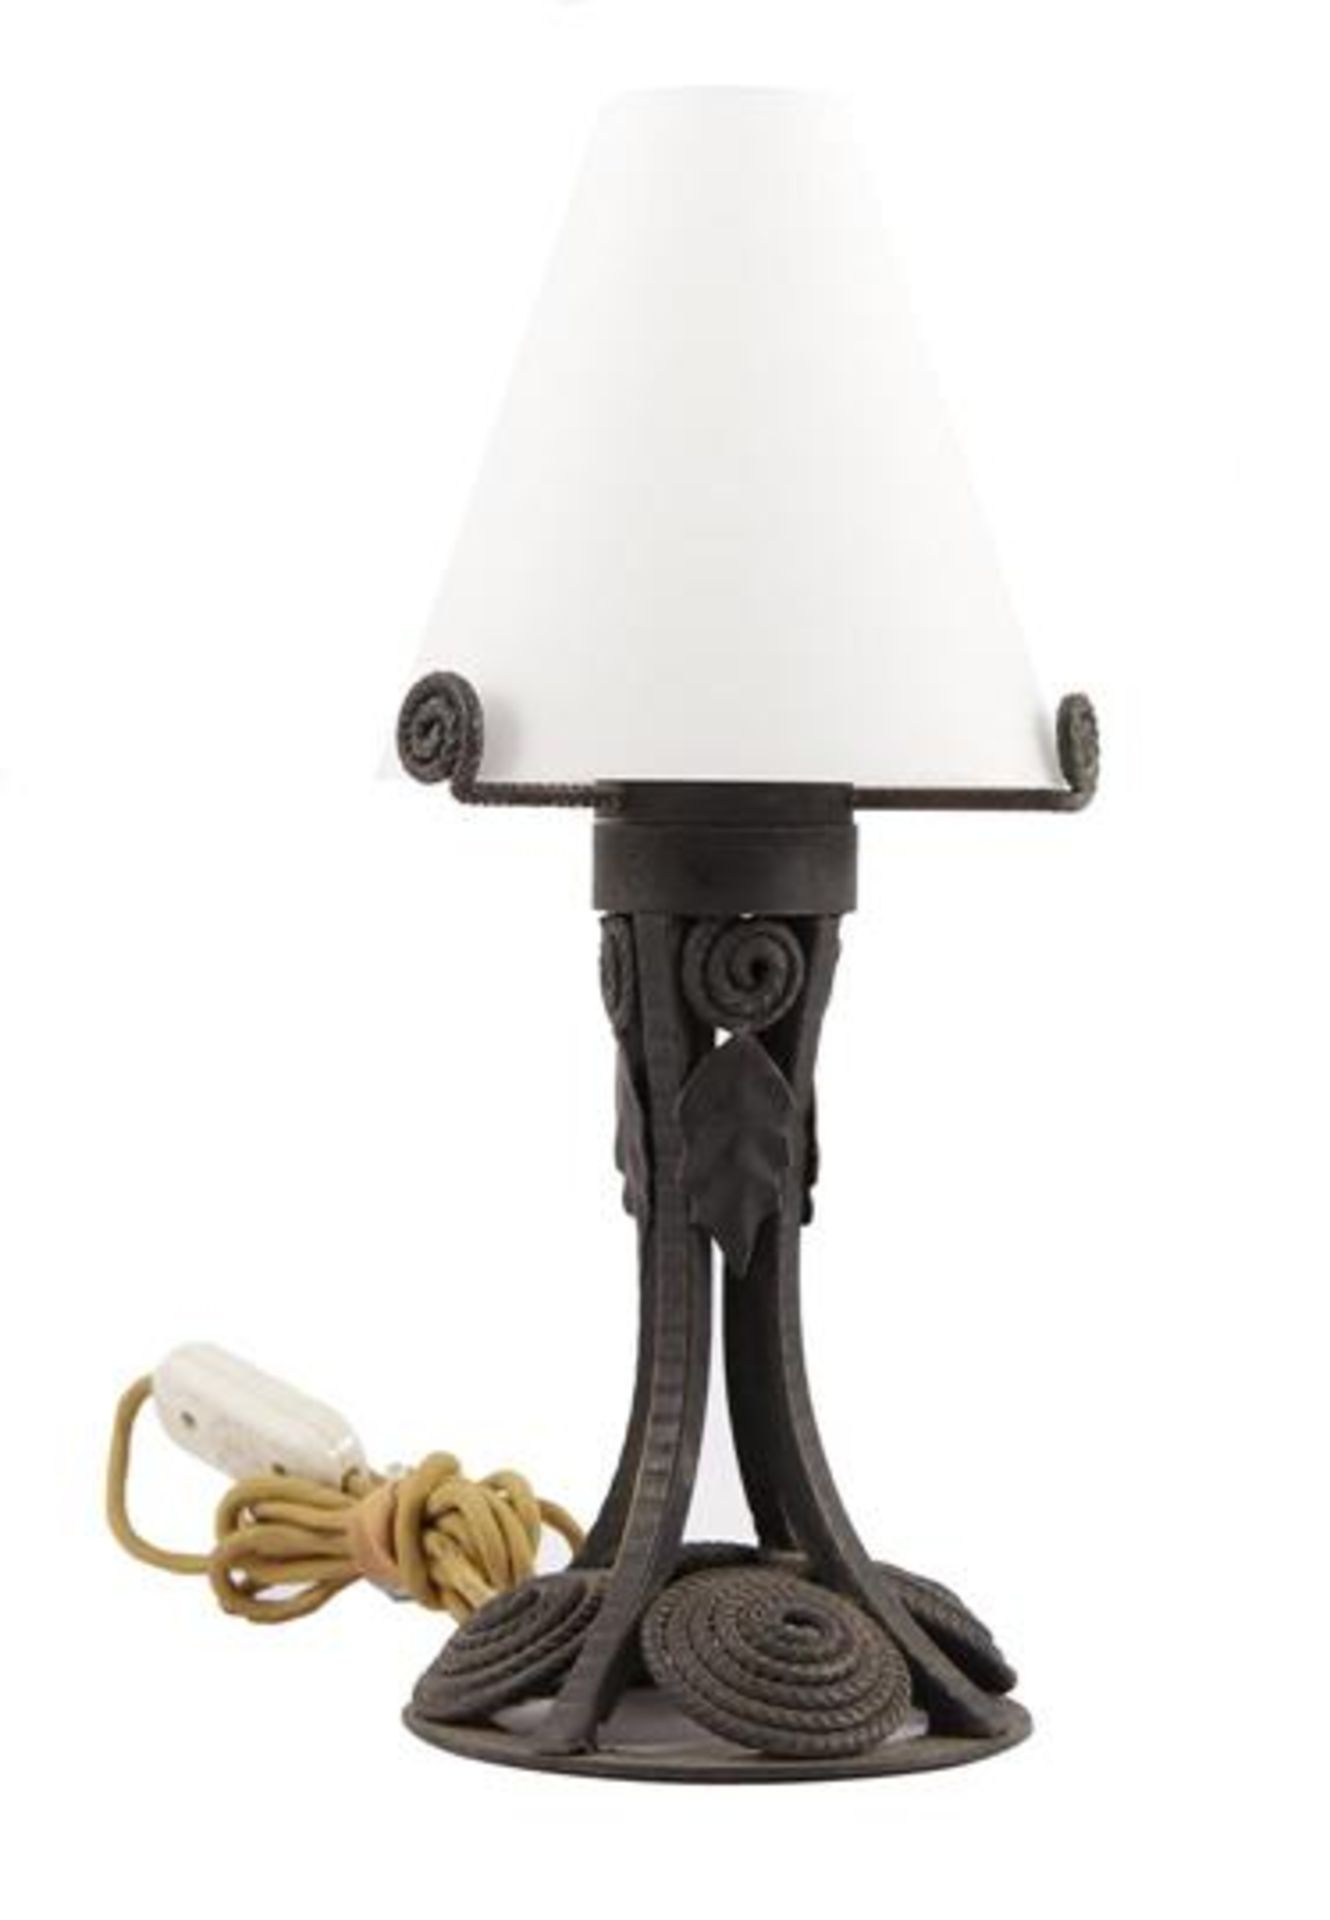 Art Deco wrought iron table lamp base approx. 1920 & nbsp; with matching Vetri & nbsp; Murano